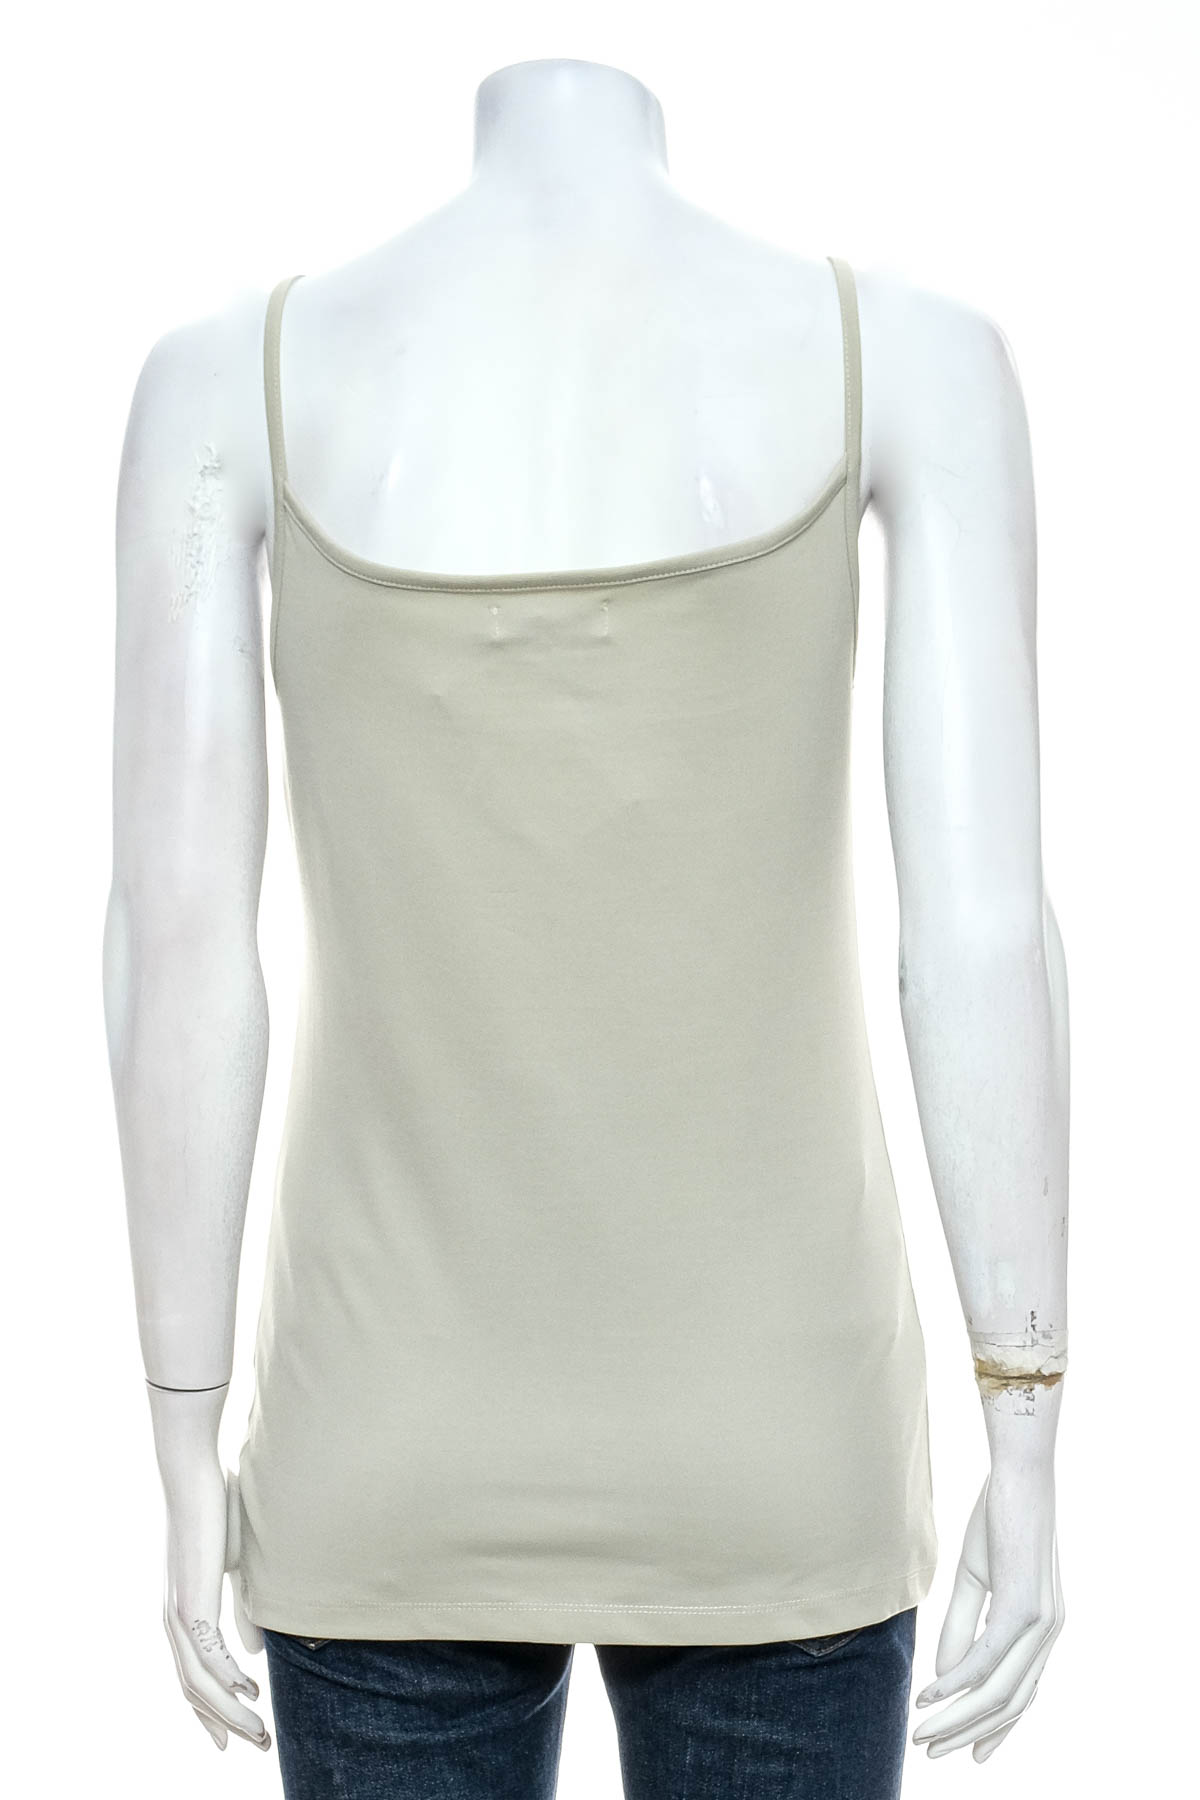 Women's top - Mar Collection - 1